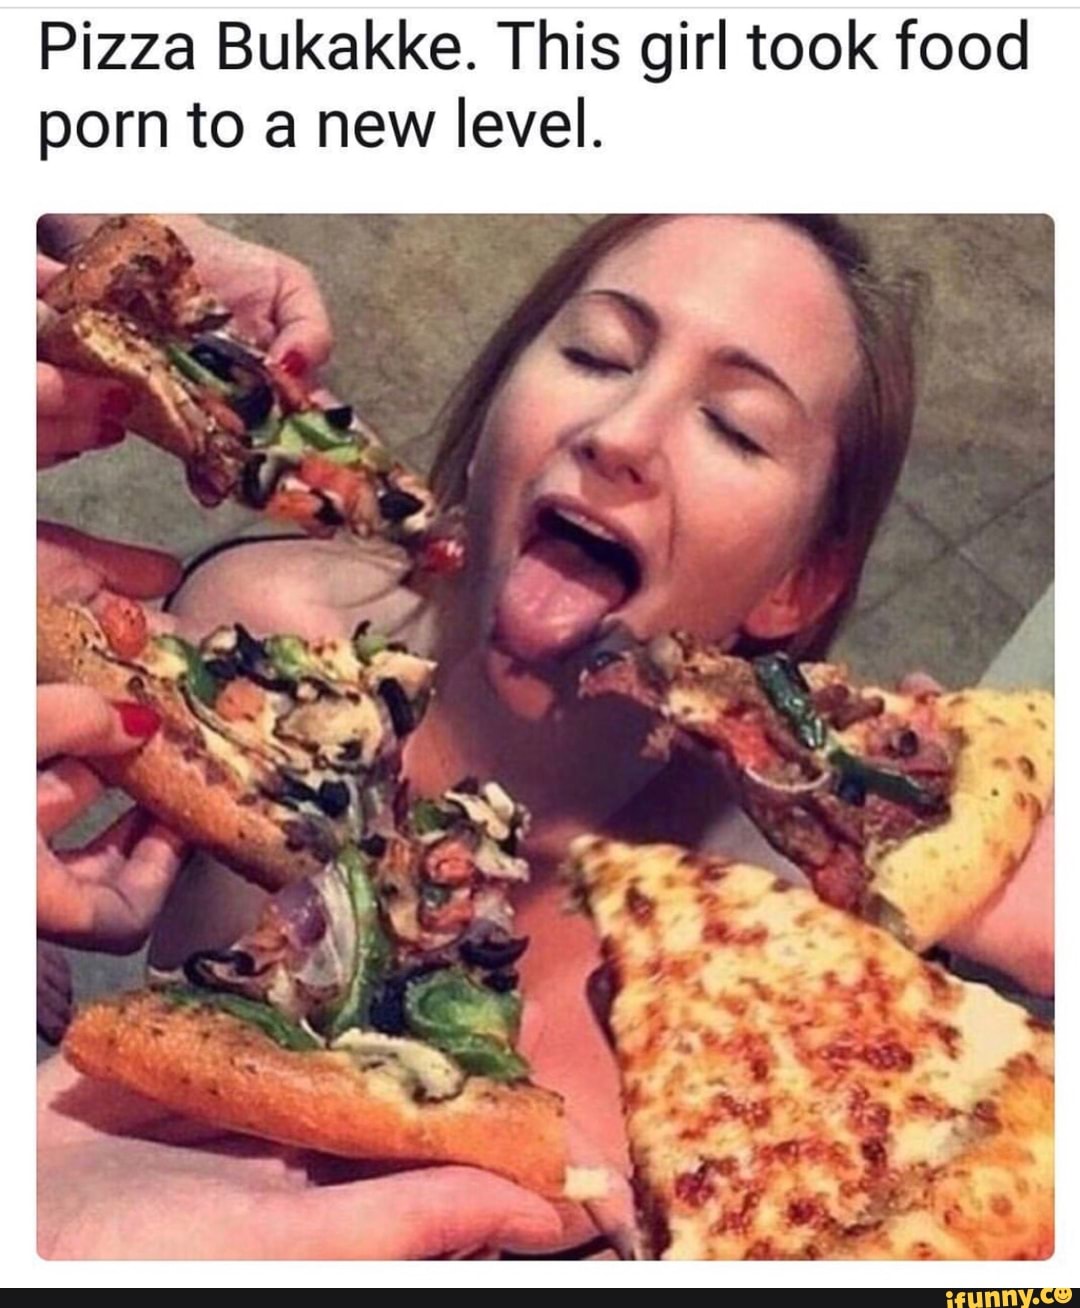 Food Porn Captions - Pizza Bukakke. This girl took food porn to a new level. - iFunny :)